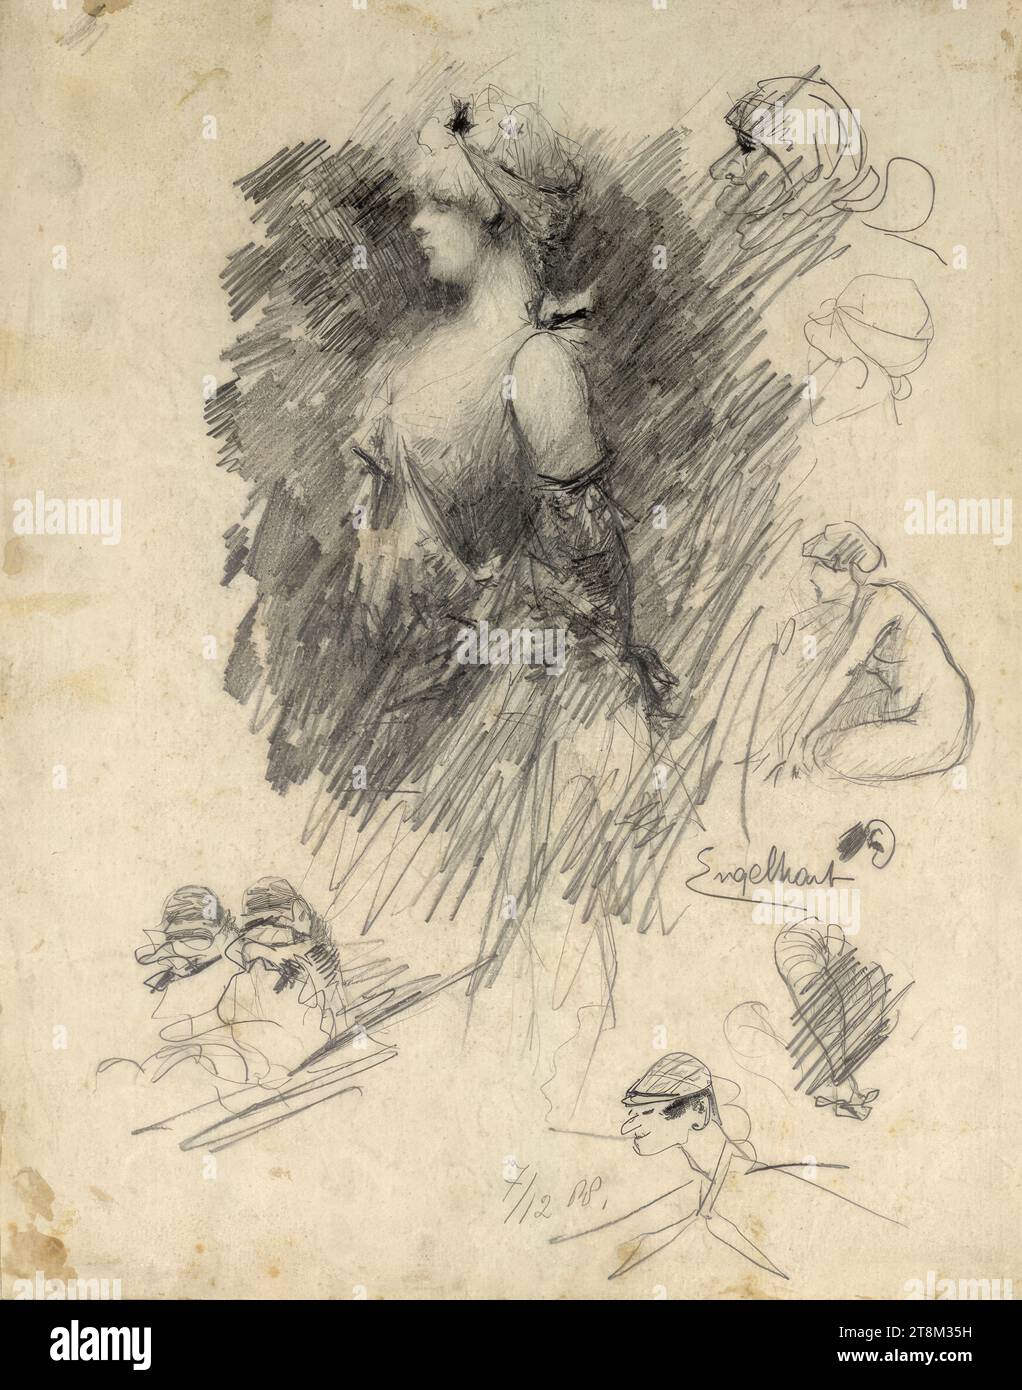 Half length figure of a girl in a ball gown and other sketches, Hagengesellschaft, Josef Engelhart (Vienna 1864 - 1941 Vienna), 1888, drawing, pencil, 24.8 x 19.3 cm Stock Photo